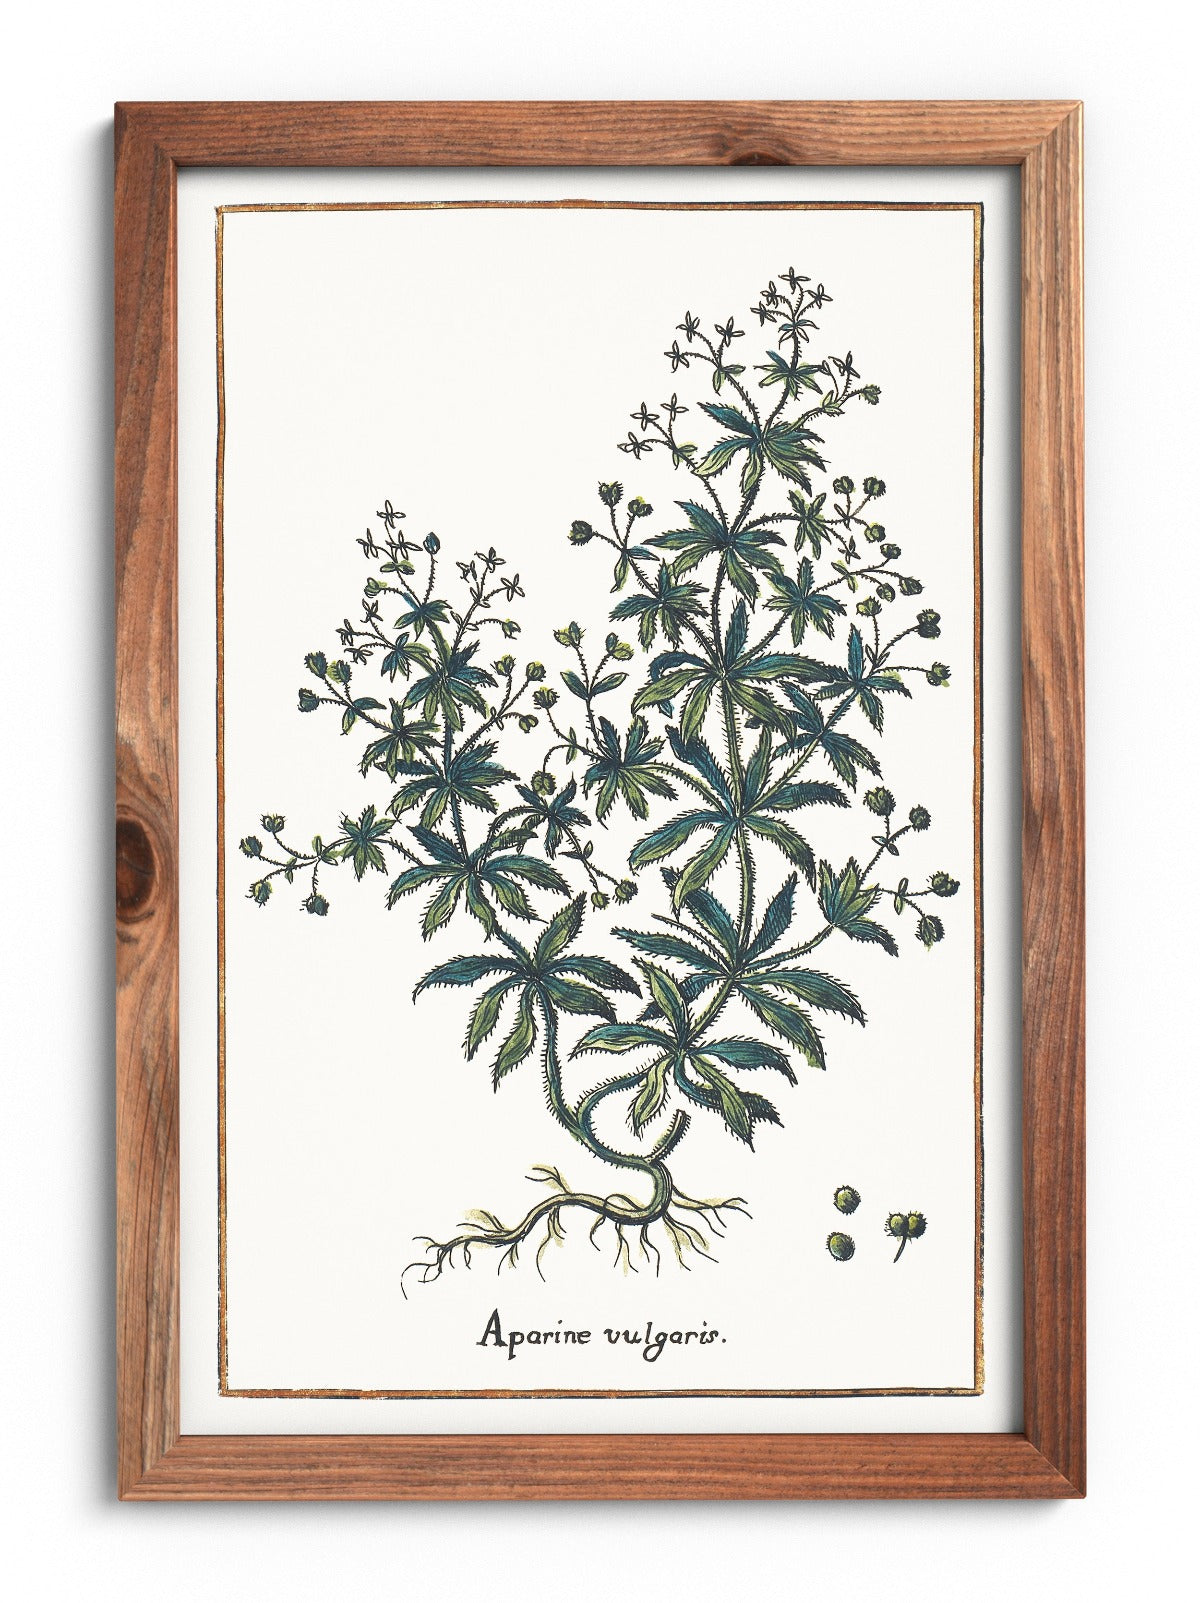 Clinging bedstraw poster